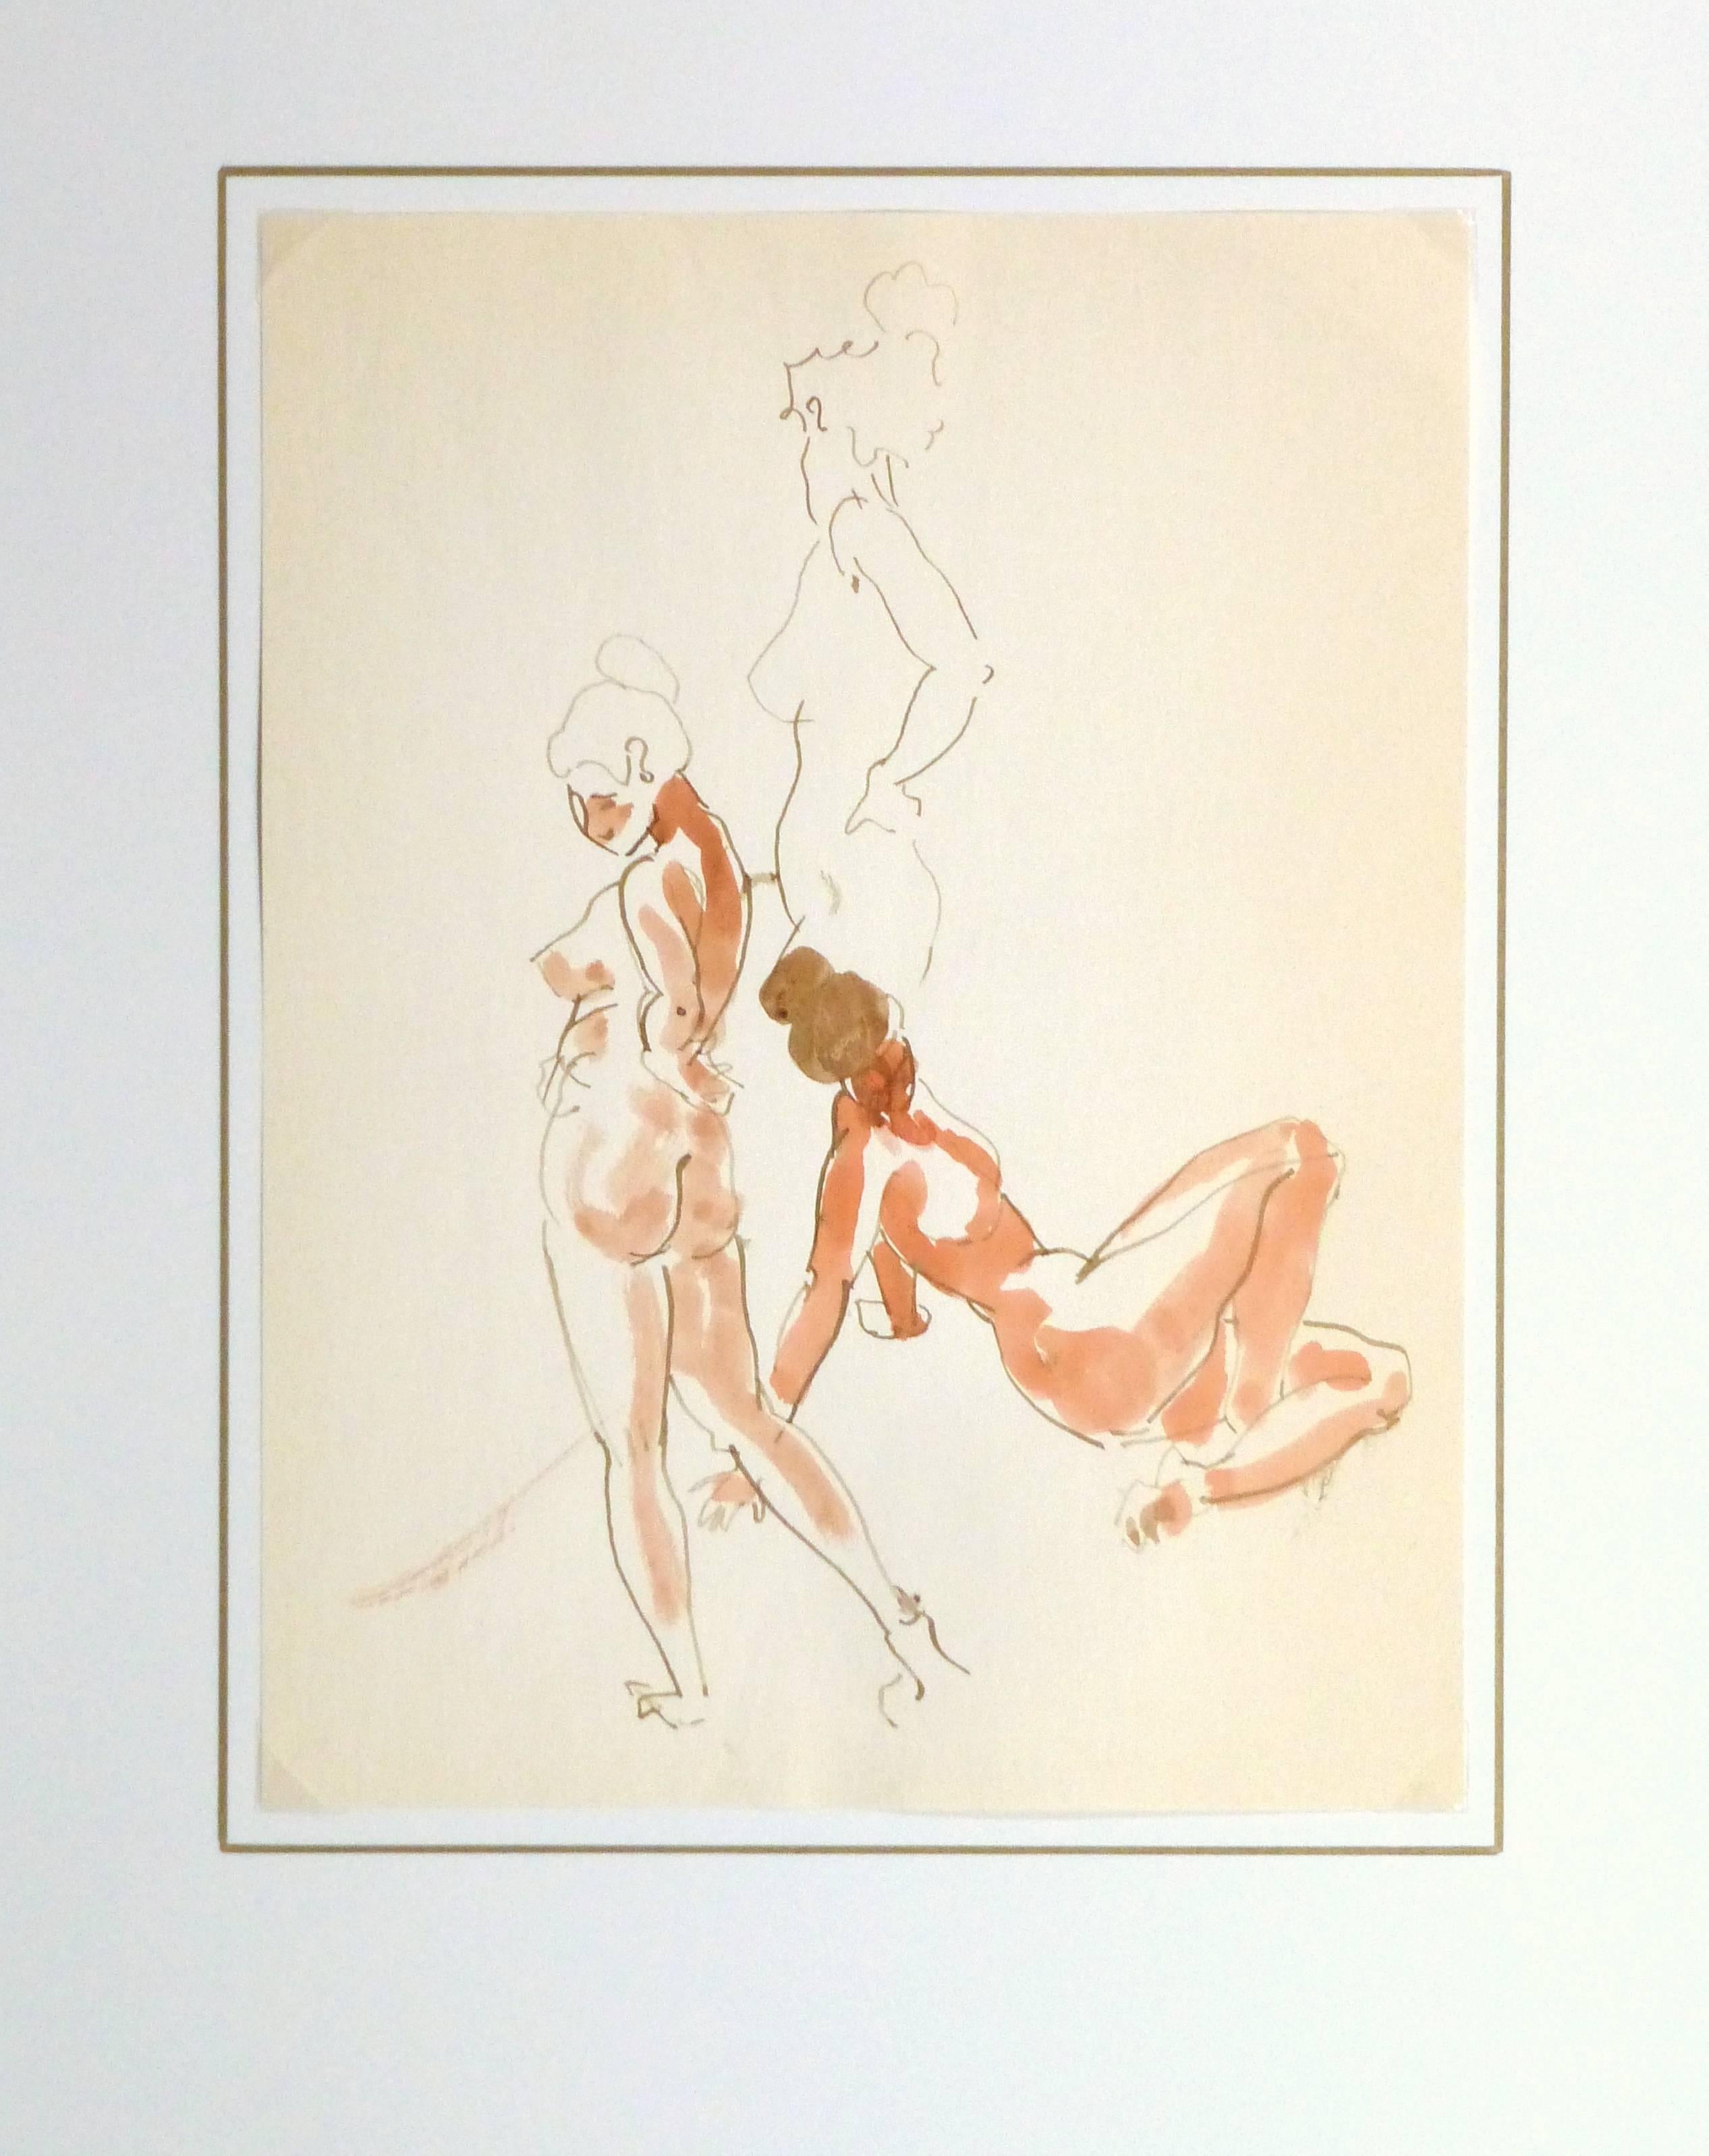 Softly hued watercolor painting of a nude female figure in various poses, circa 1960.

Original artwork on paper displayed on a white mat with a gold border. Archival plastic sleeve and Certificate of Authenticity included. Artwork, 14